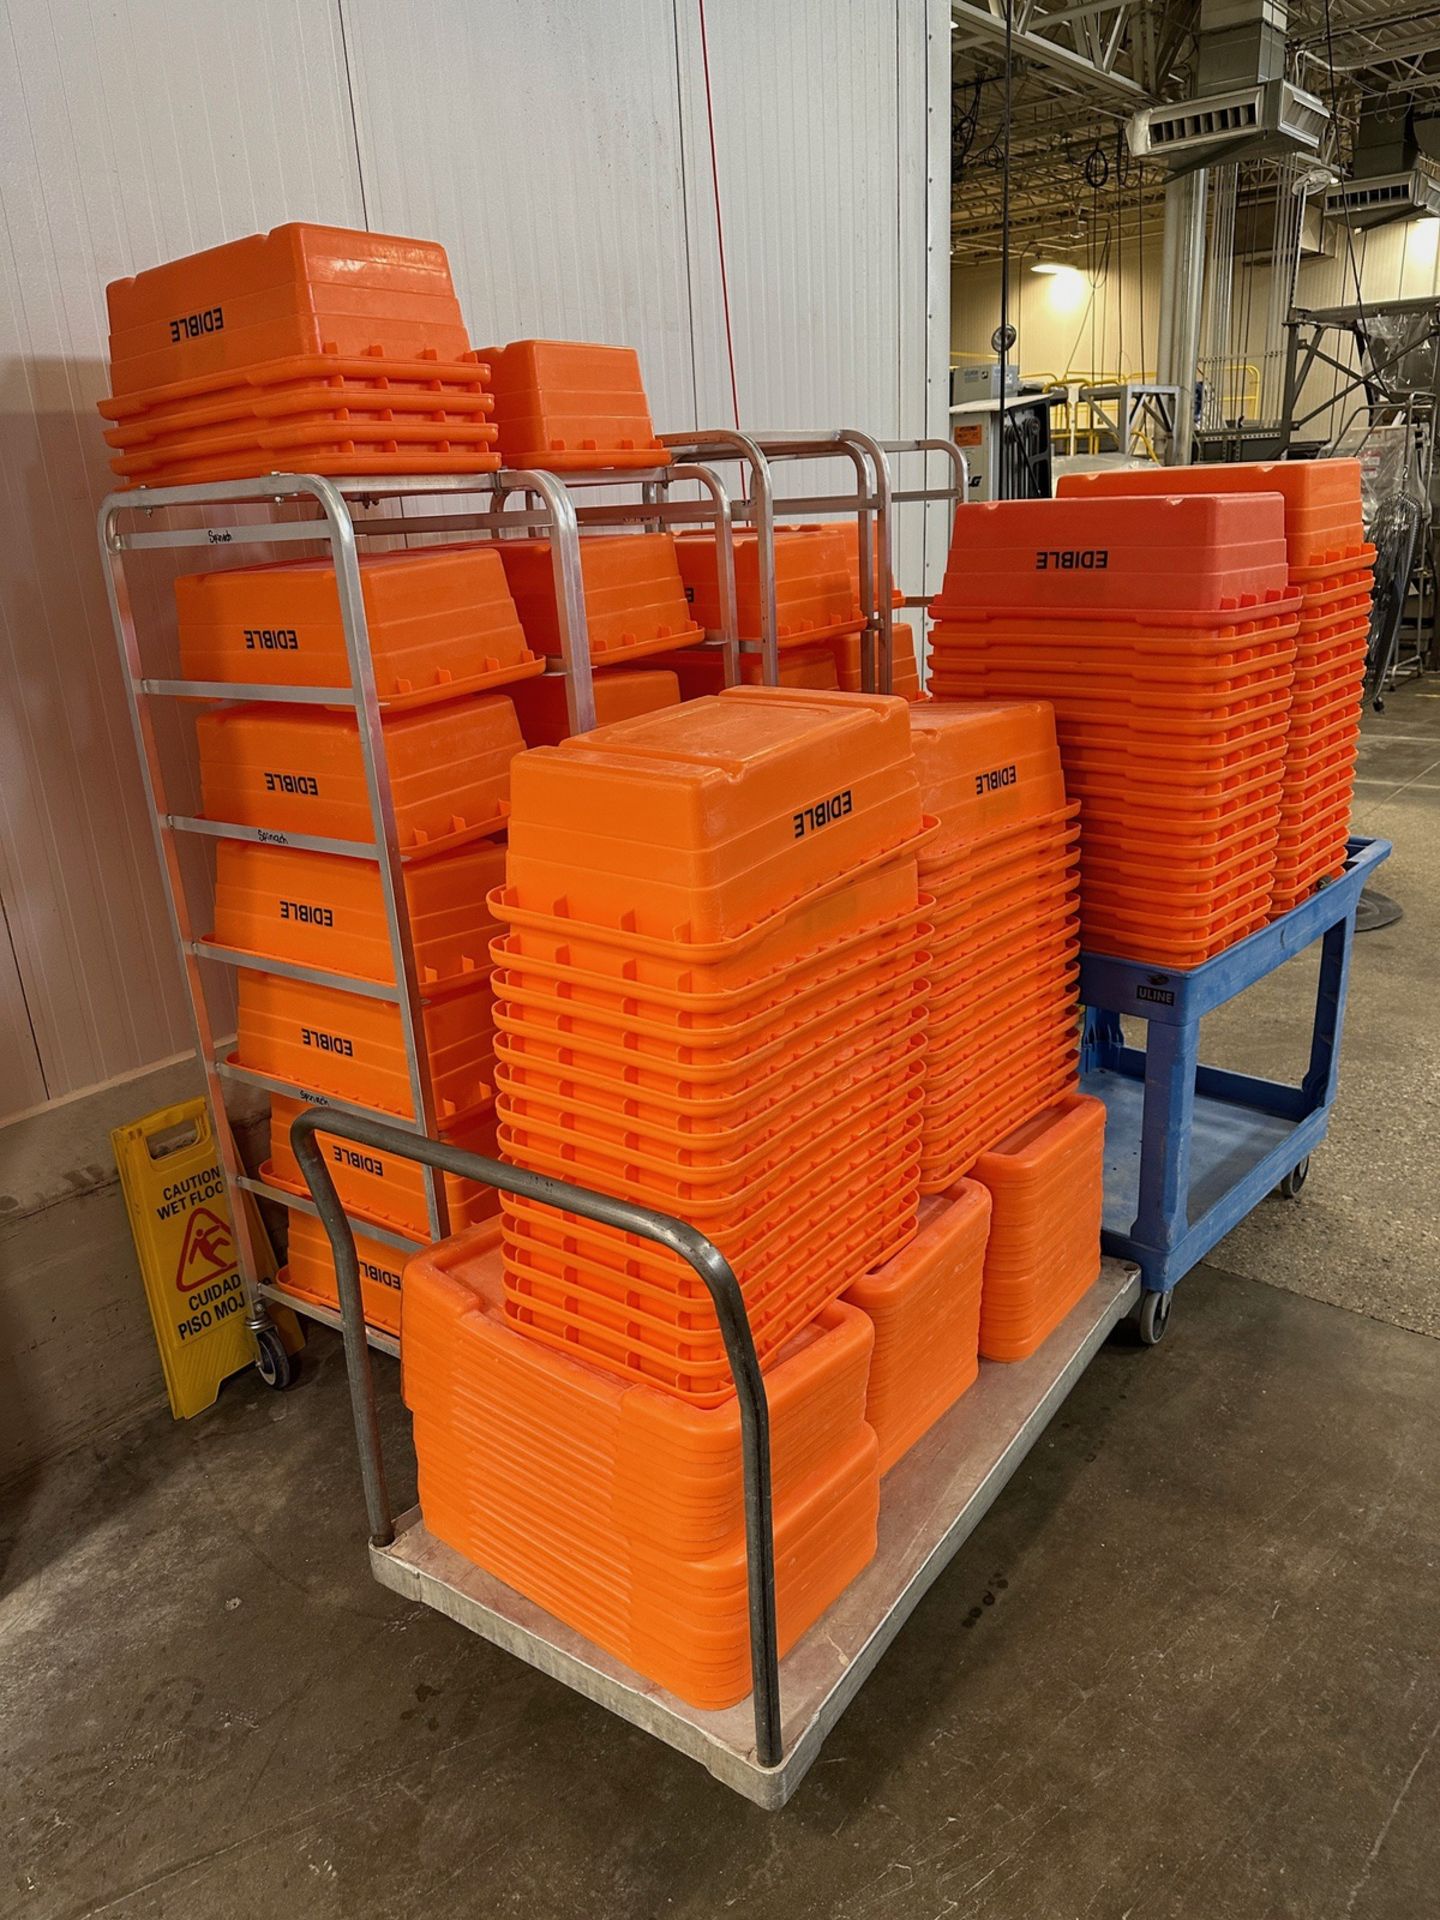 Lot of Orange Plastic "Edible" Food Containers (Approx. 15" x 2') with (4) Aluminum | Rig Fee $200 - Image 2 of 2